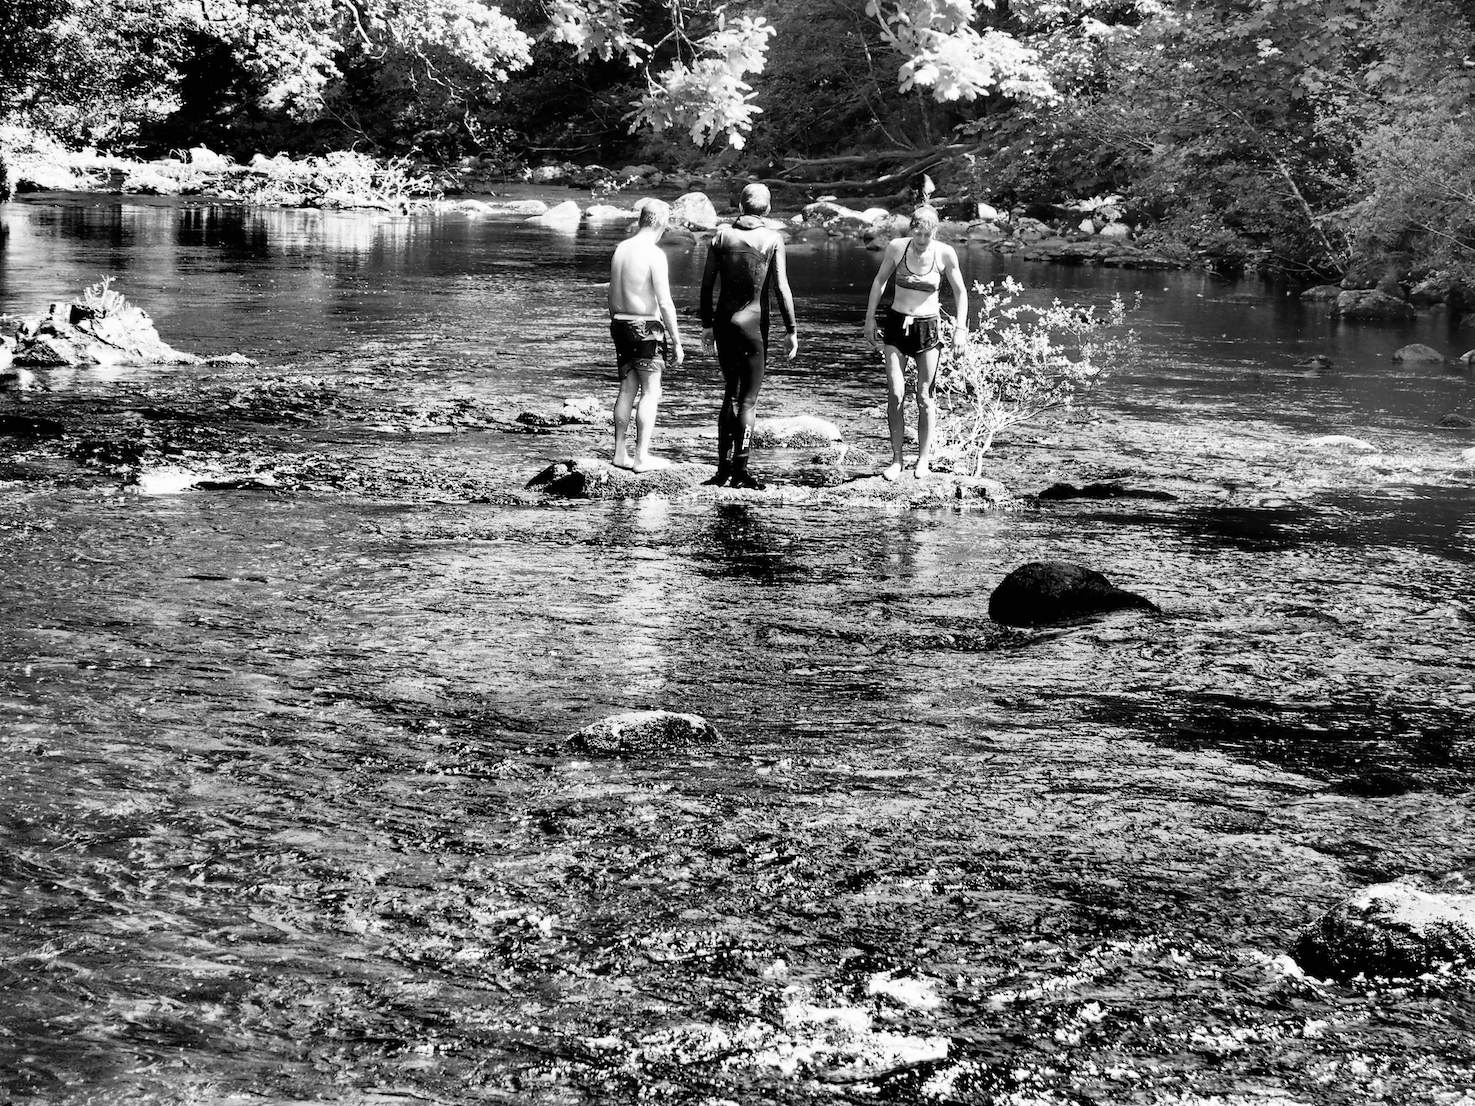  The swimmers contemplate the river 